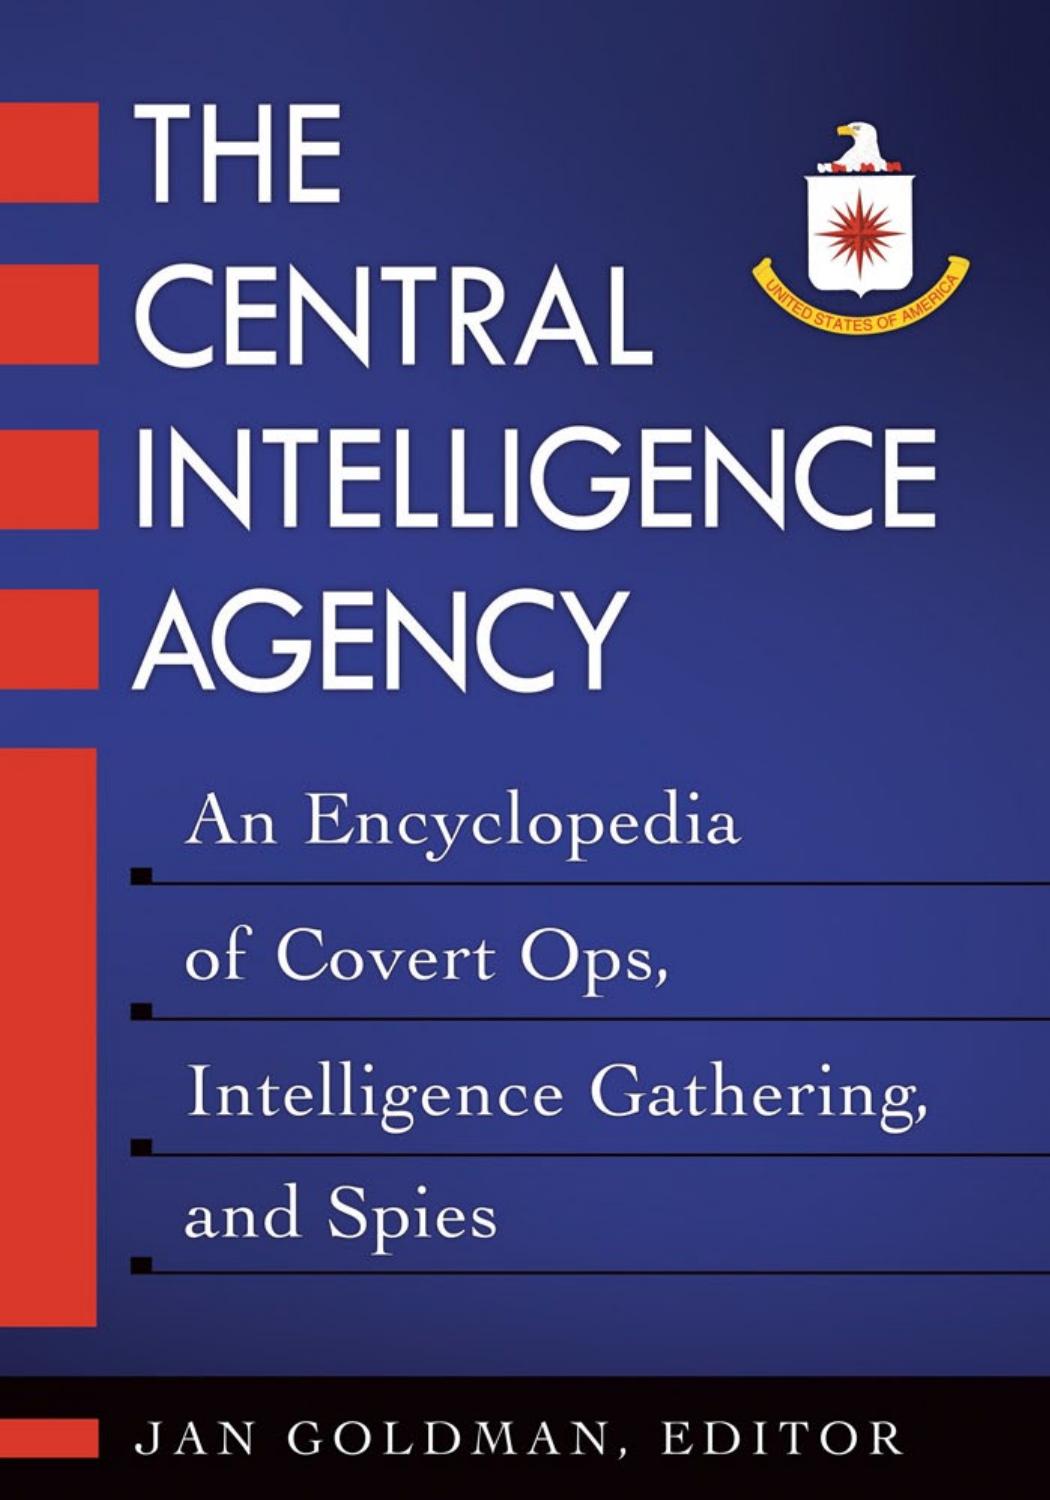 The Central Intelligence Agency: An Encyclopedia of Covert Ops, Intelligence Gathering, and Spies